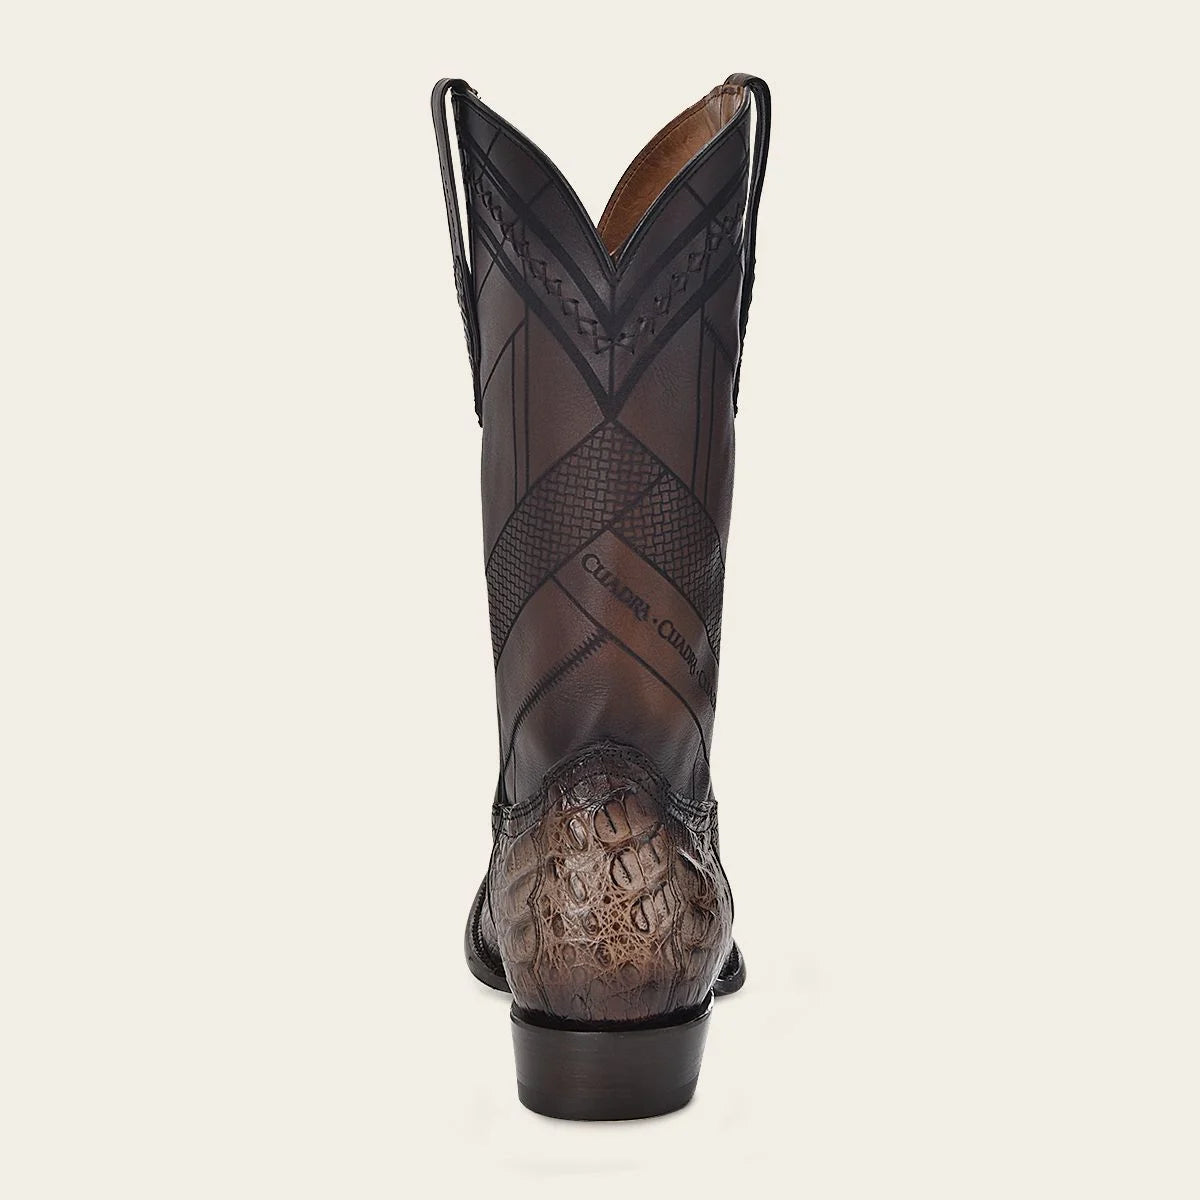 Hand-painted traditional exotic dark brown leather boot